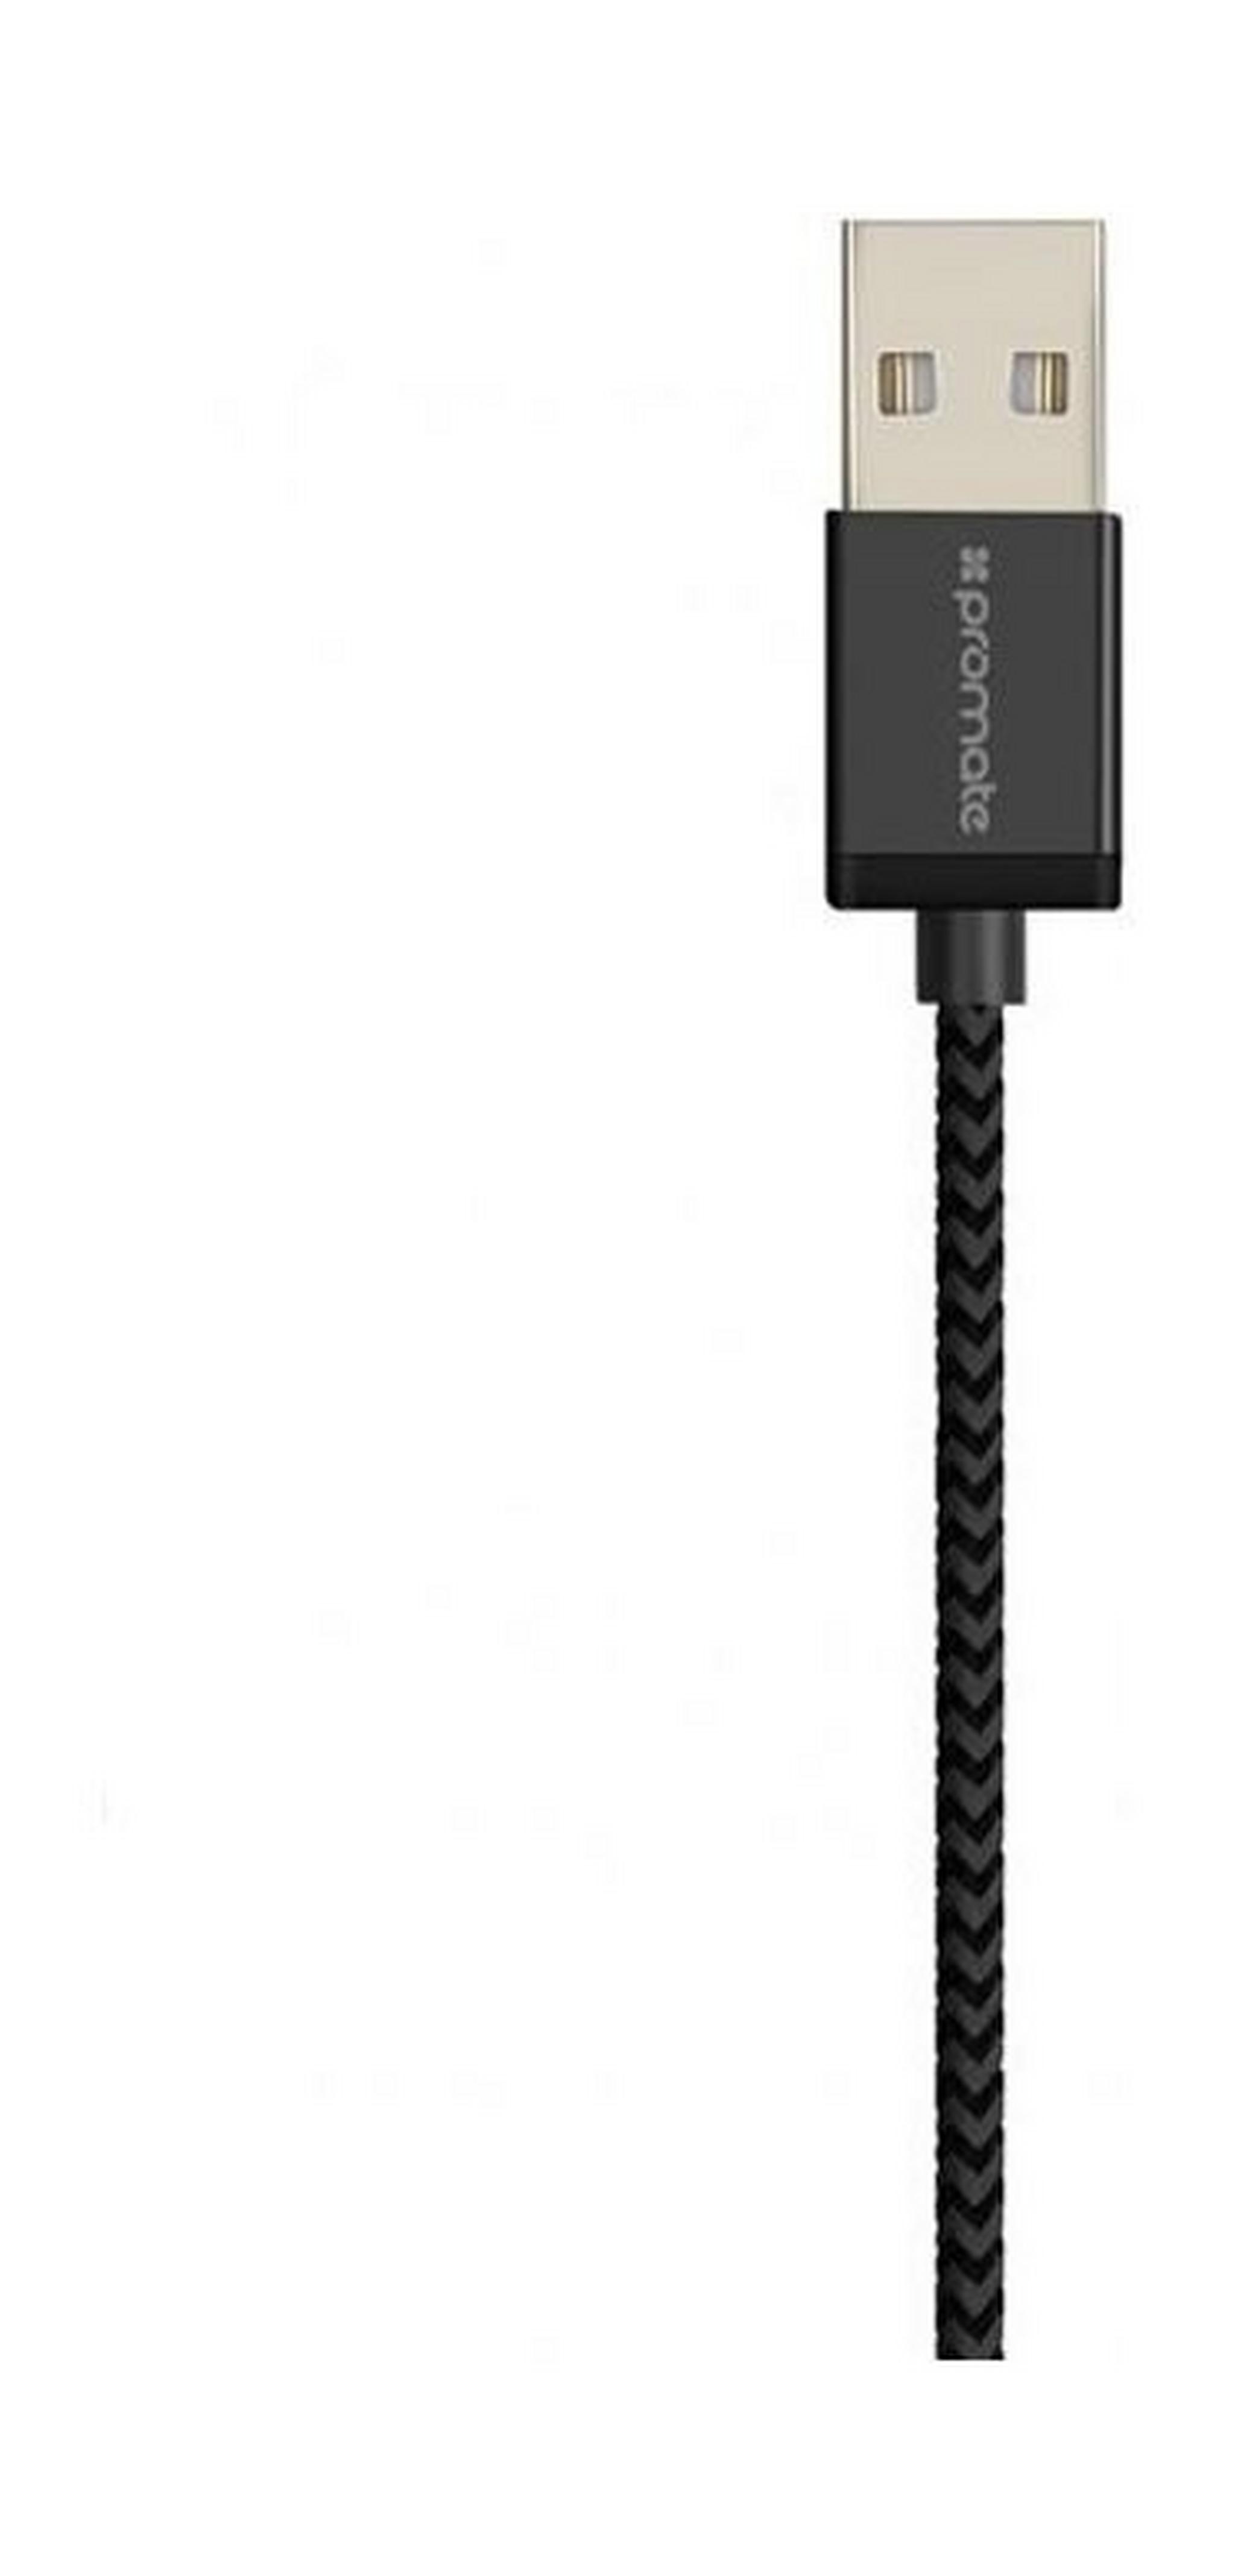 Promate Unilink-TRIO 3-in-1 Multifunctional Universal Sync and Charge Cable – 1M – Grey